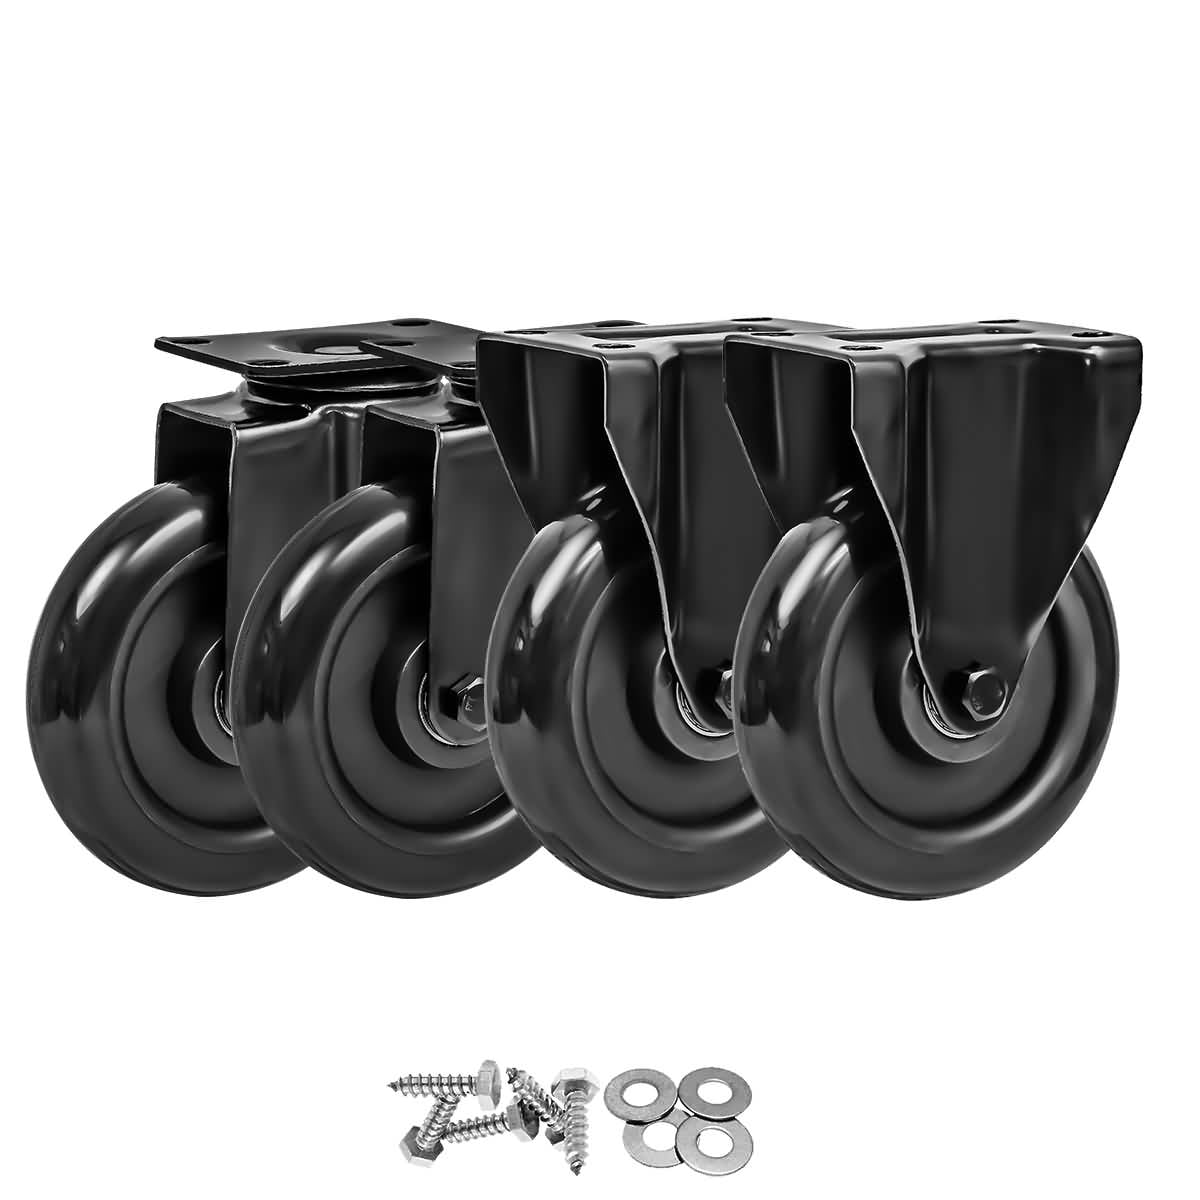 Details about   4 Pack 5" Rigid Fixed Polyurethane Black Non Swivel Caster Wheels w/ Hardware 